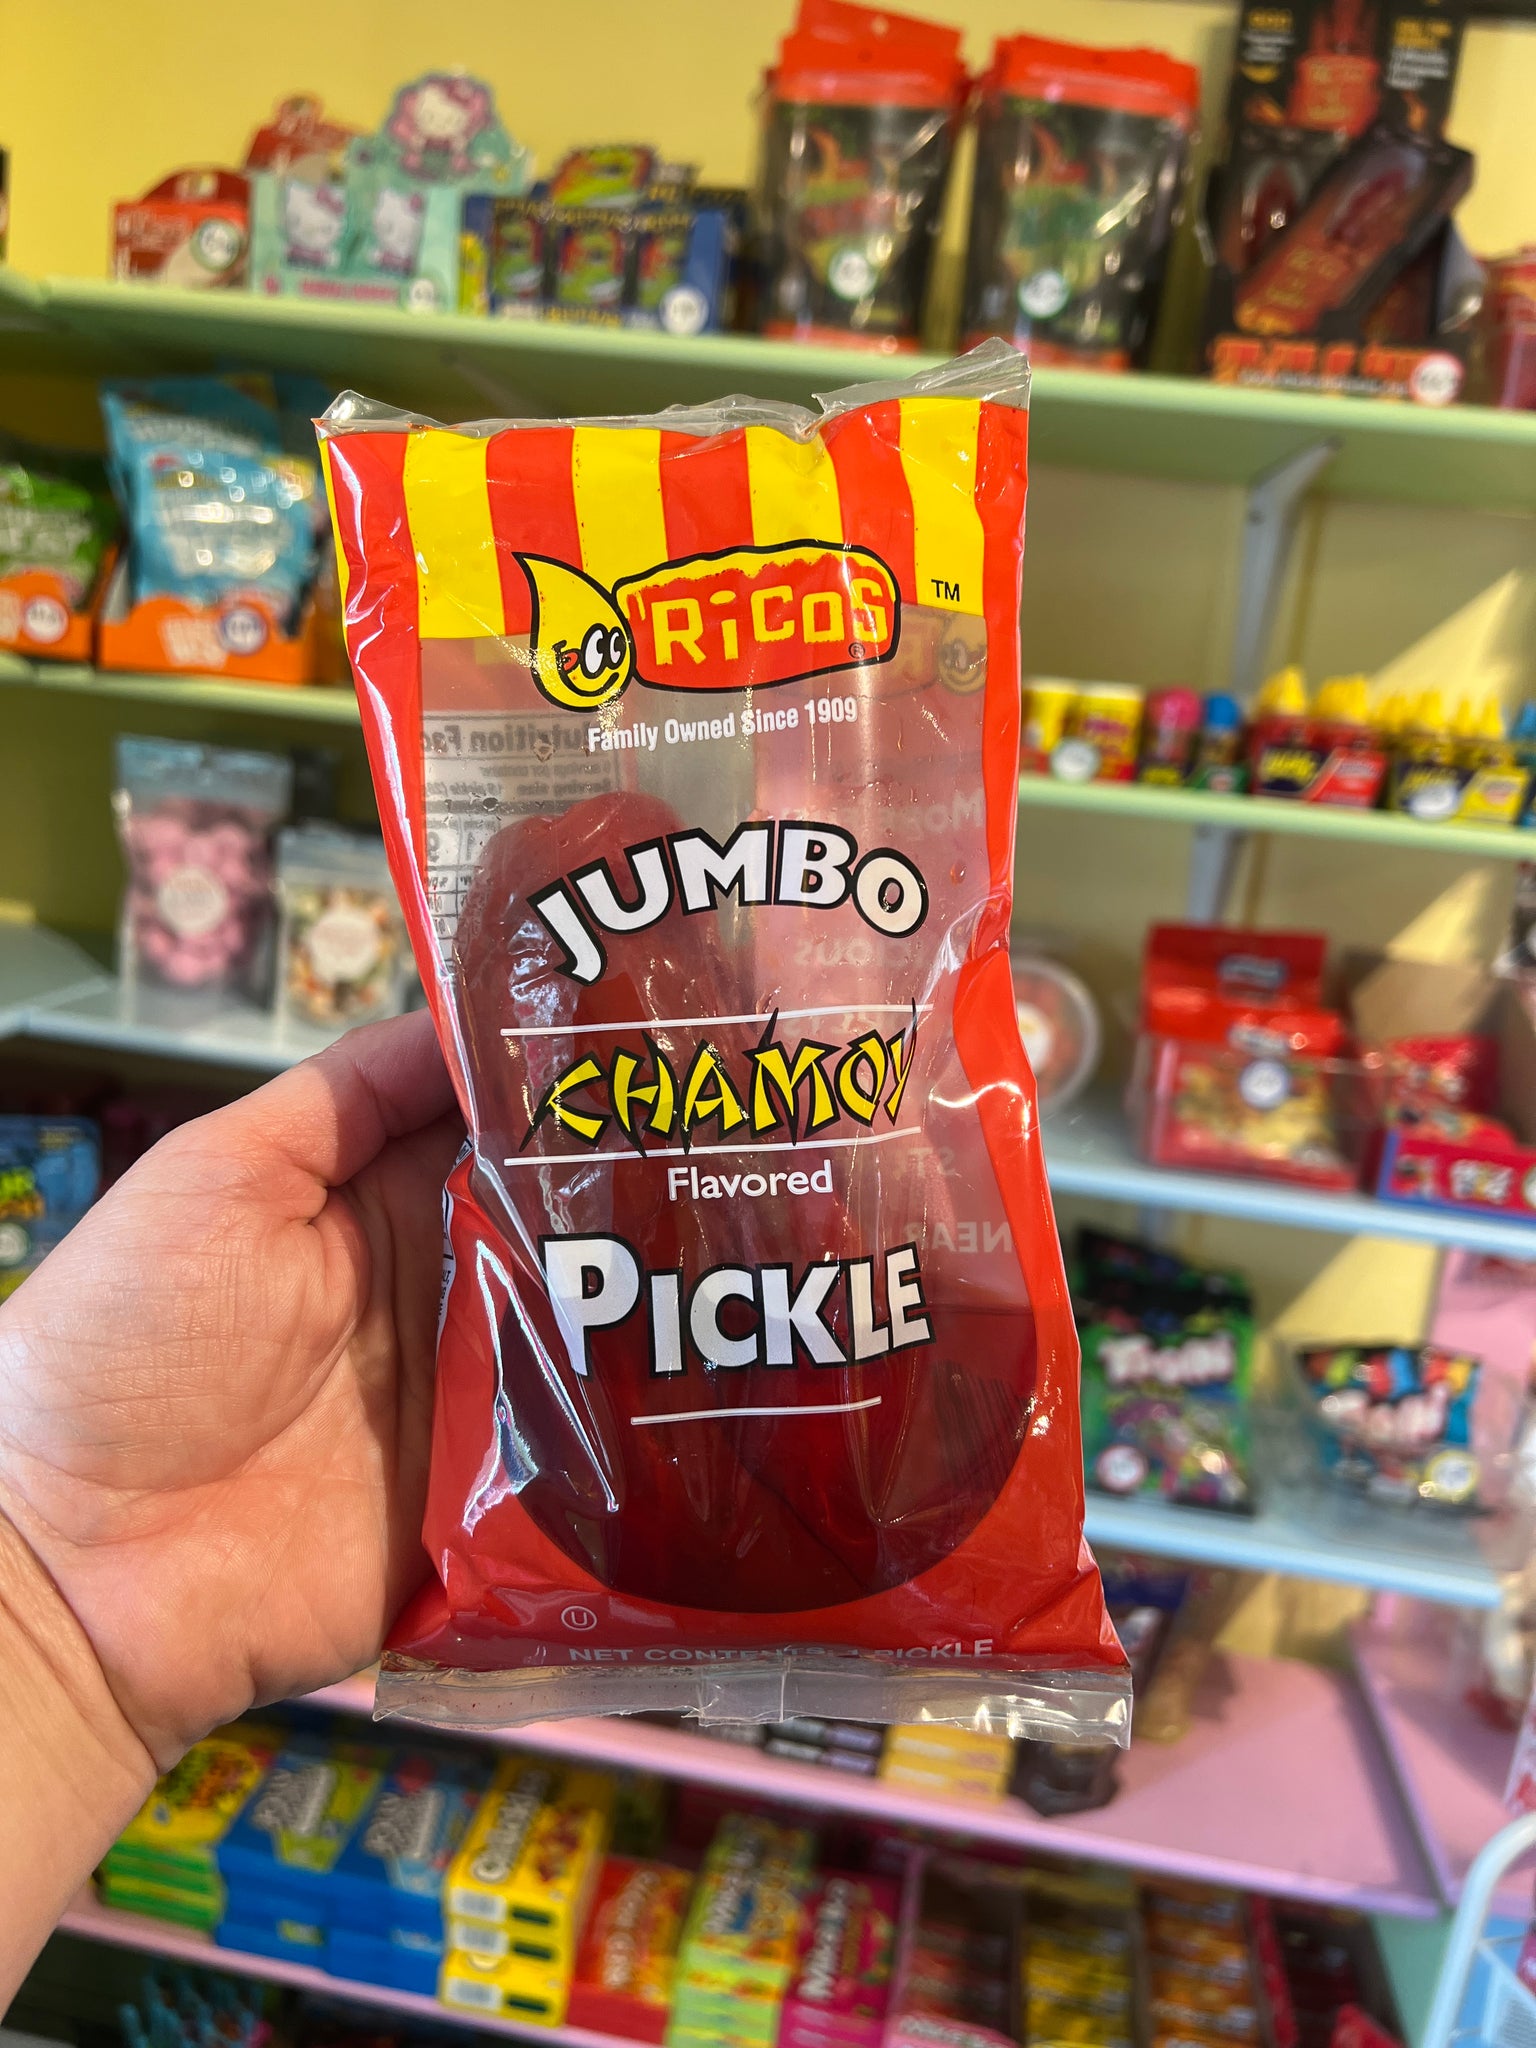 Ricos Chamoy Pickle